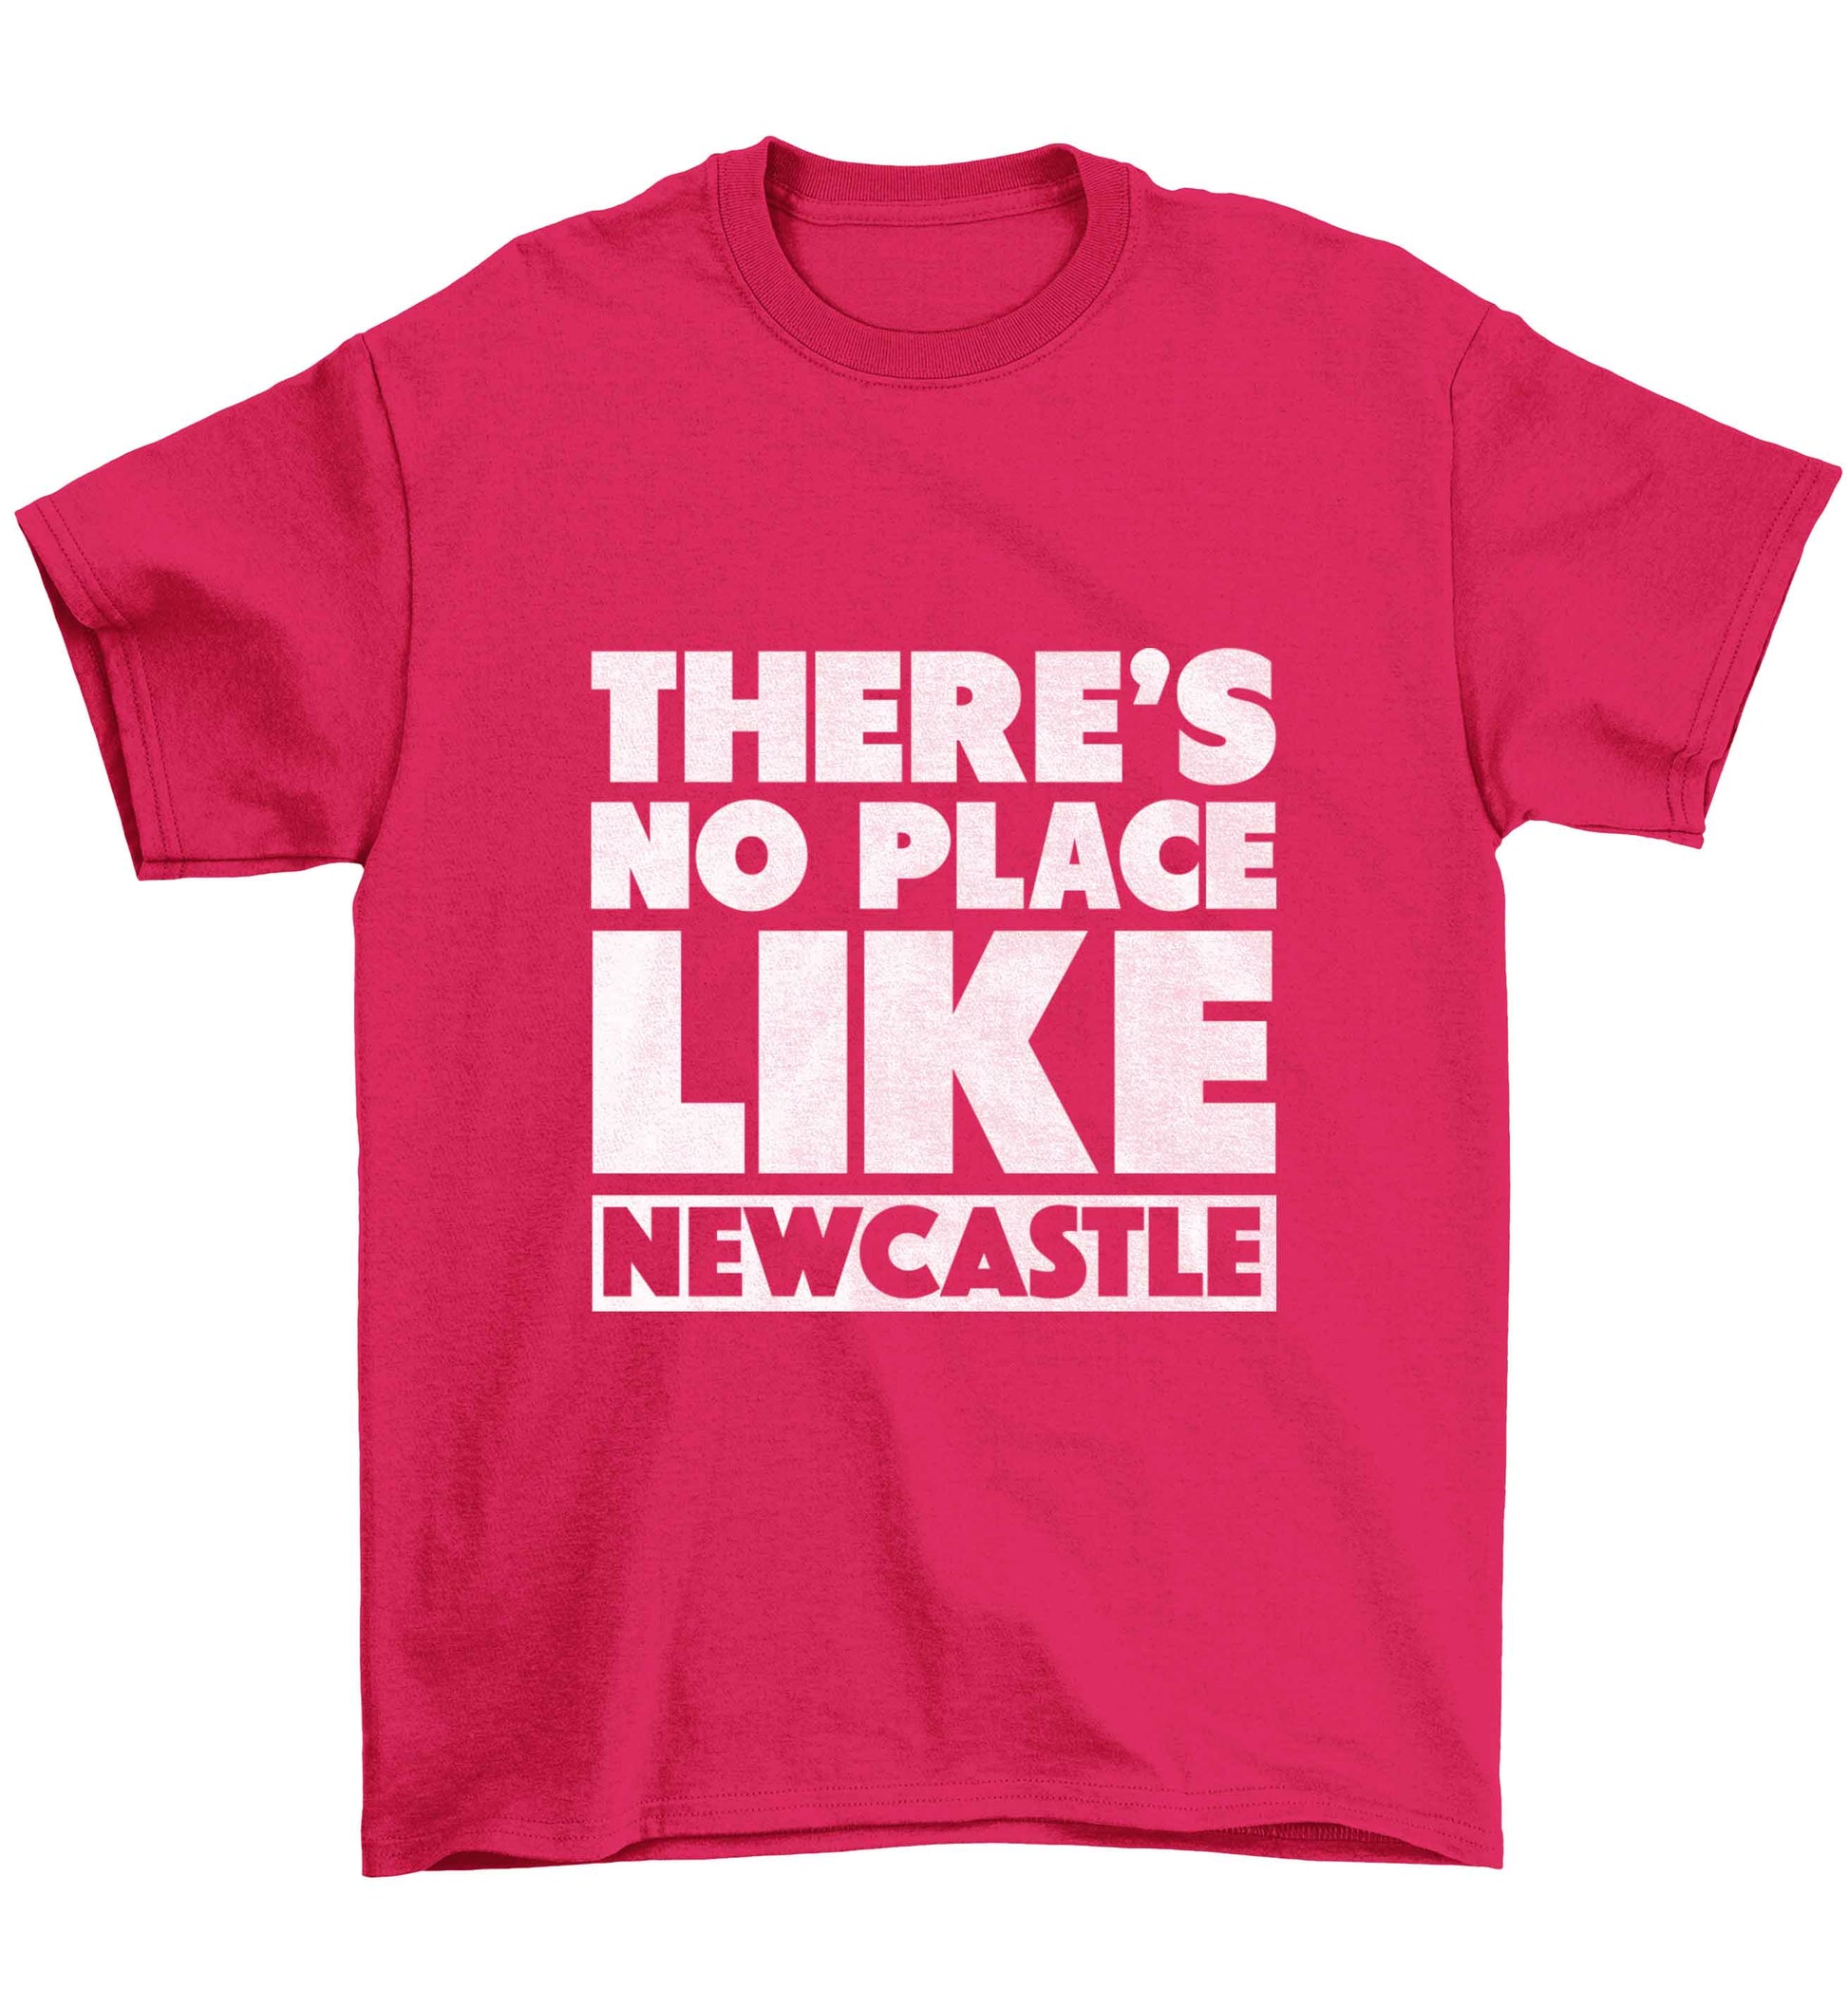 There's no place like Newcastle Children's pink Tshirt 12-13 Years